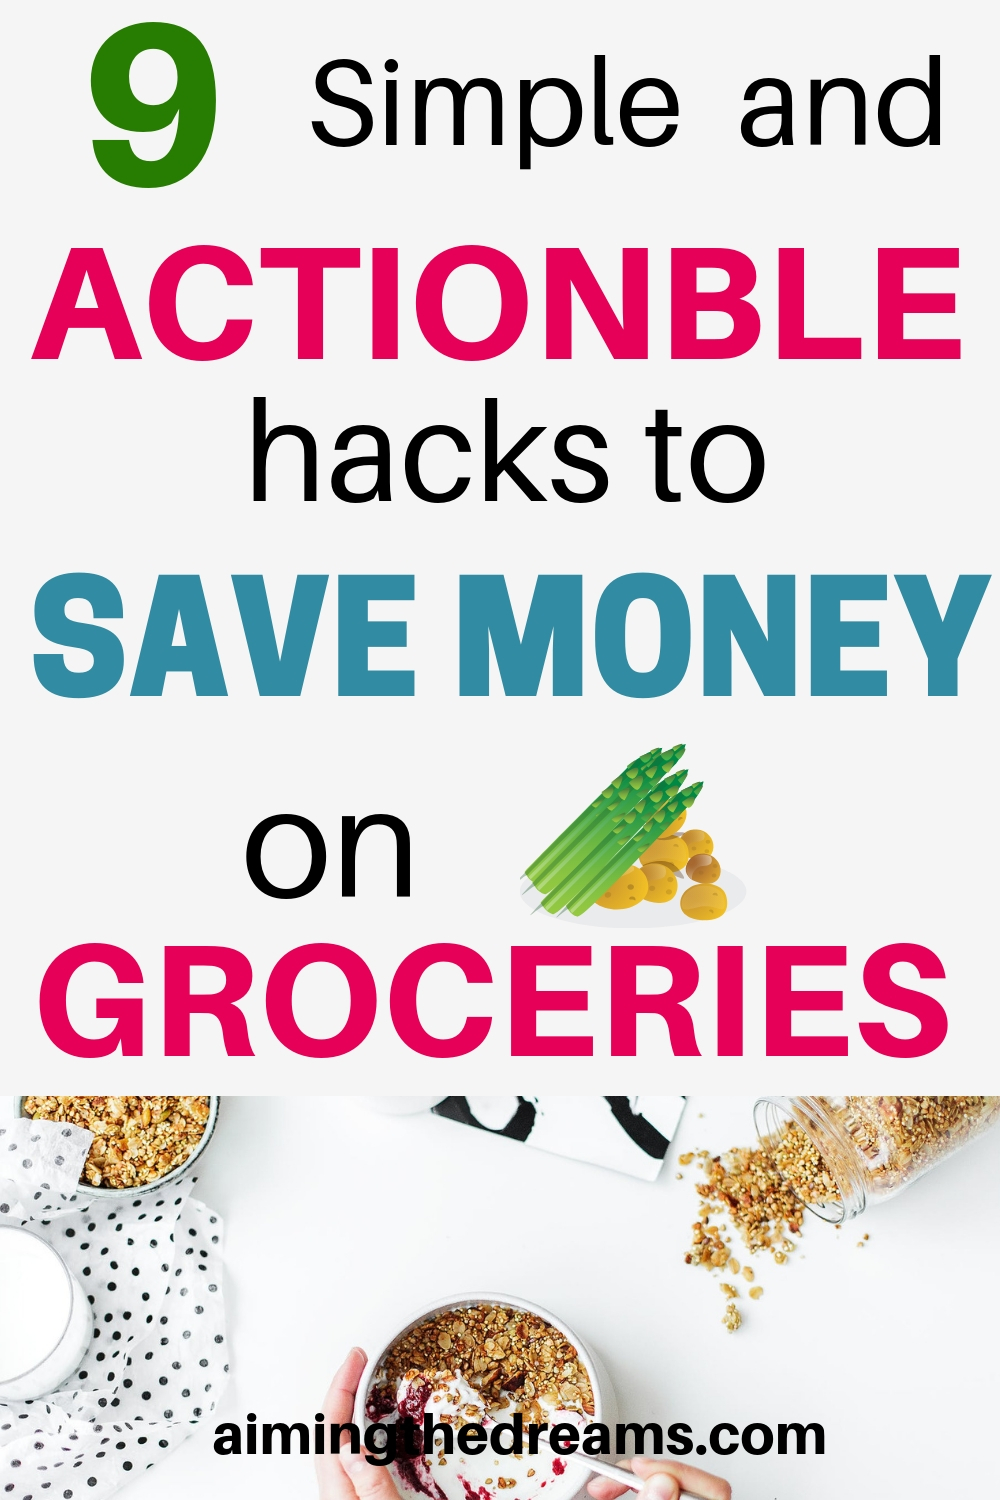 9 simple and actionable hacks to save money on groceries each month. Build wealth with simple changes in your lifestyle.